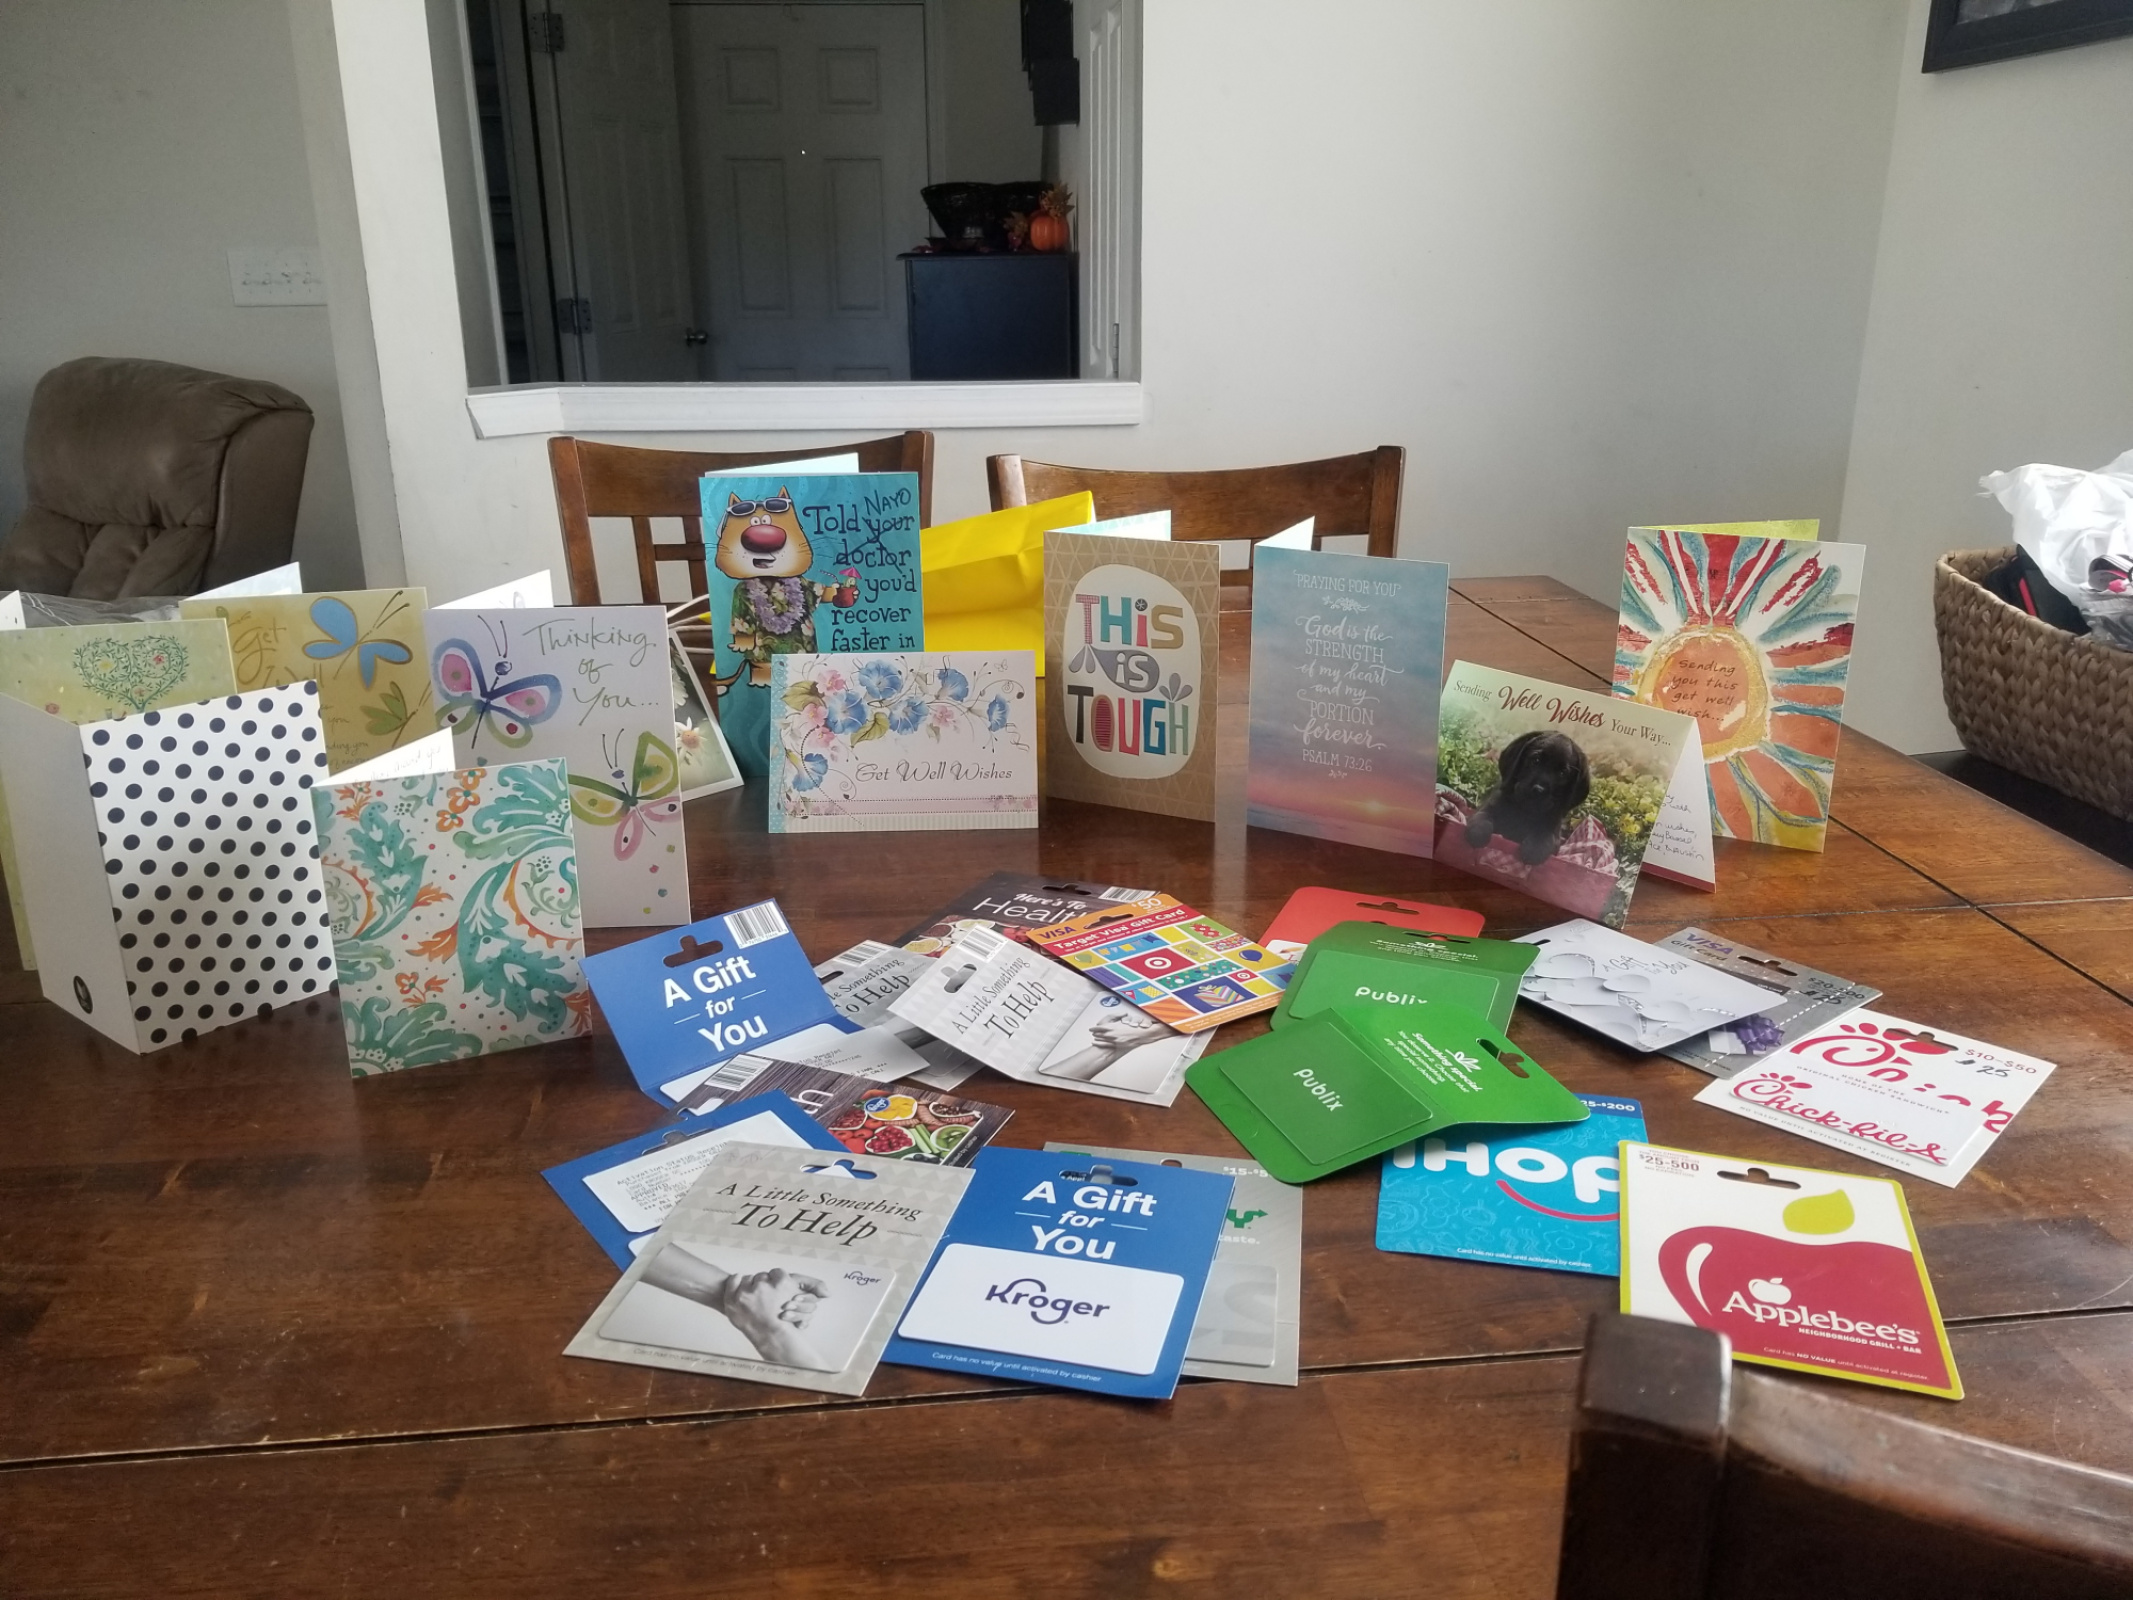 A multitude of gift cards from our White Oak "OWL" family: Keen, Cancel, Coates, Ray, Azurmendi, Chiquita, Pickett, Bassel, Hulsey, Hawkins, Wood, Newkirk, Hooks, Beaucout, Shea, Neal, Aratari, Polstra and Atkinson families. 

We are SO grateful, and appreciate your generosity! 